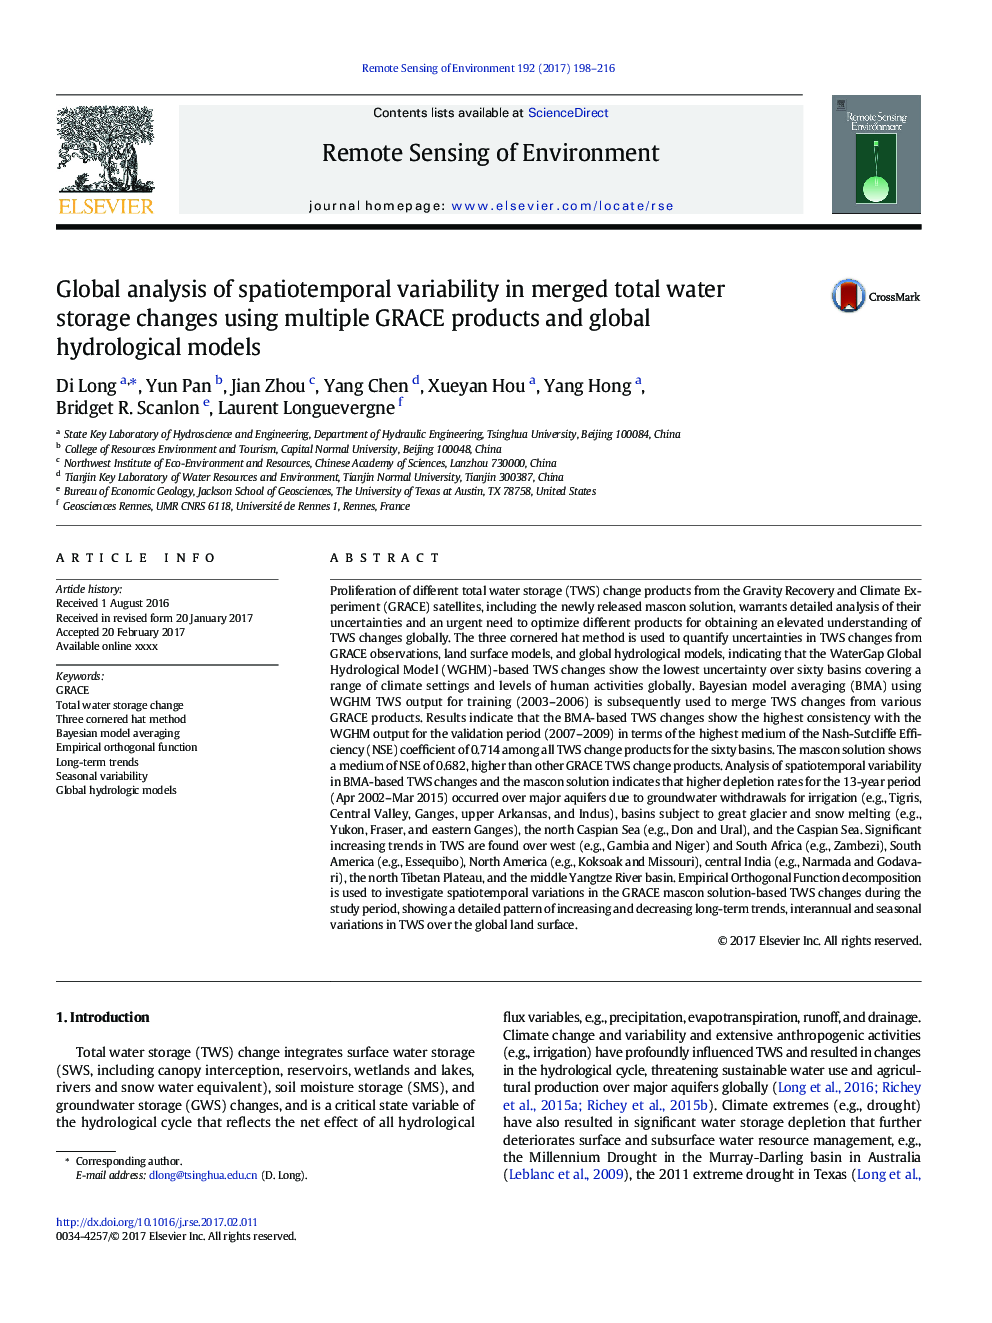 Global analysis of spatiotemporal variability in merged total water storage changes using multiple GRACE products and global hydrological models